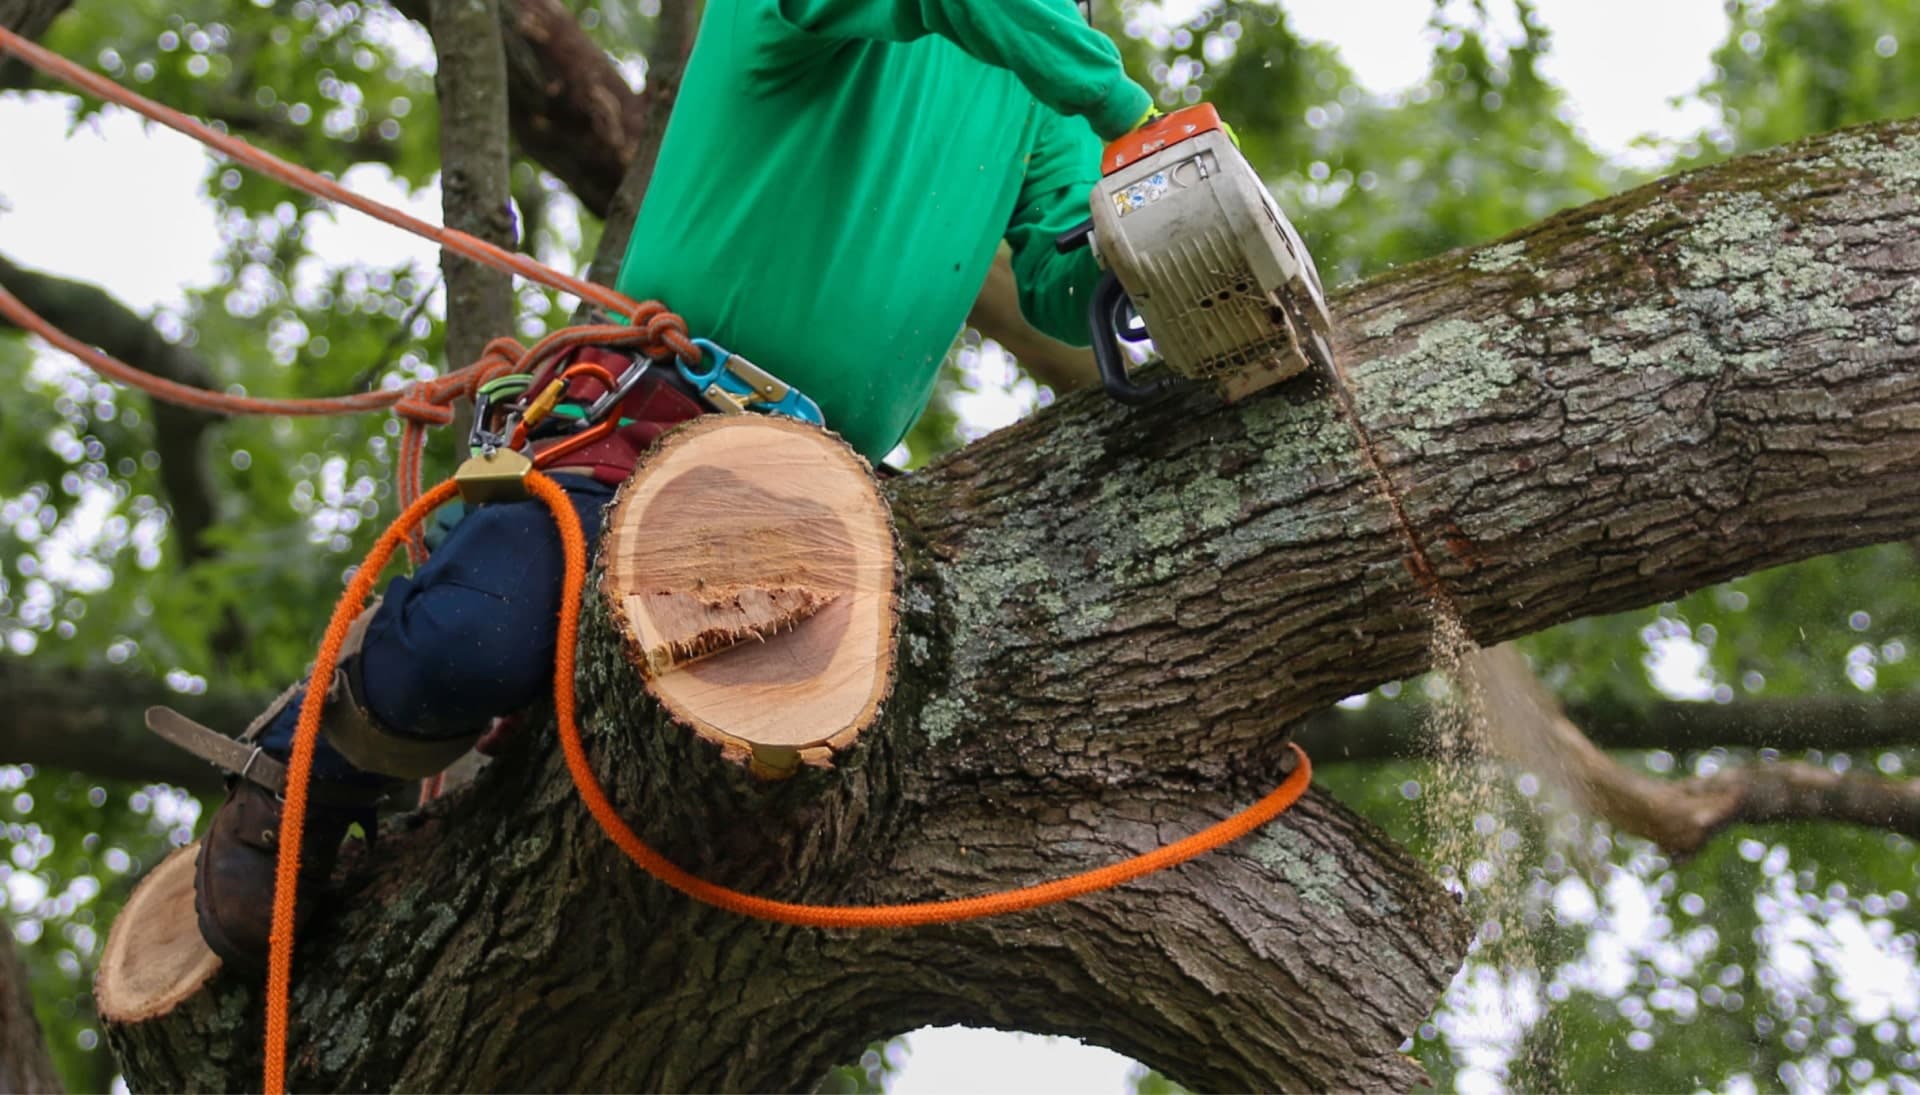 Shed your worries away with best tree removal in Jacksonville